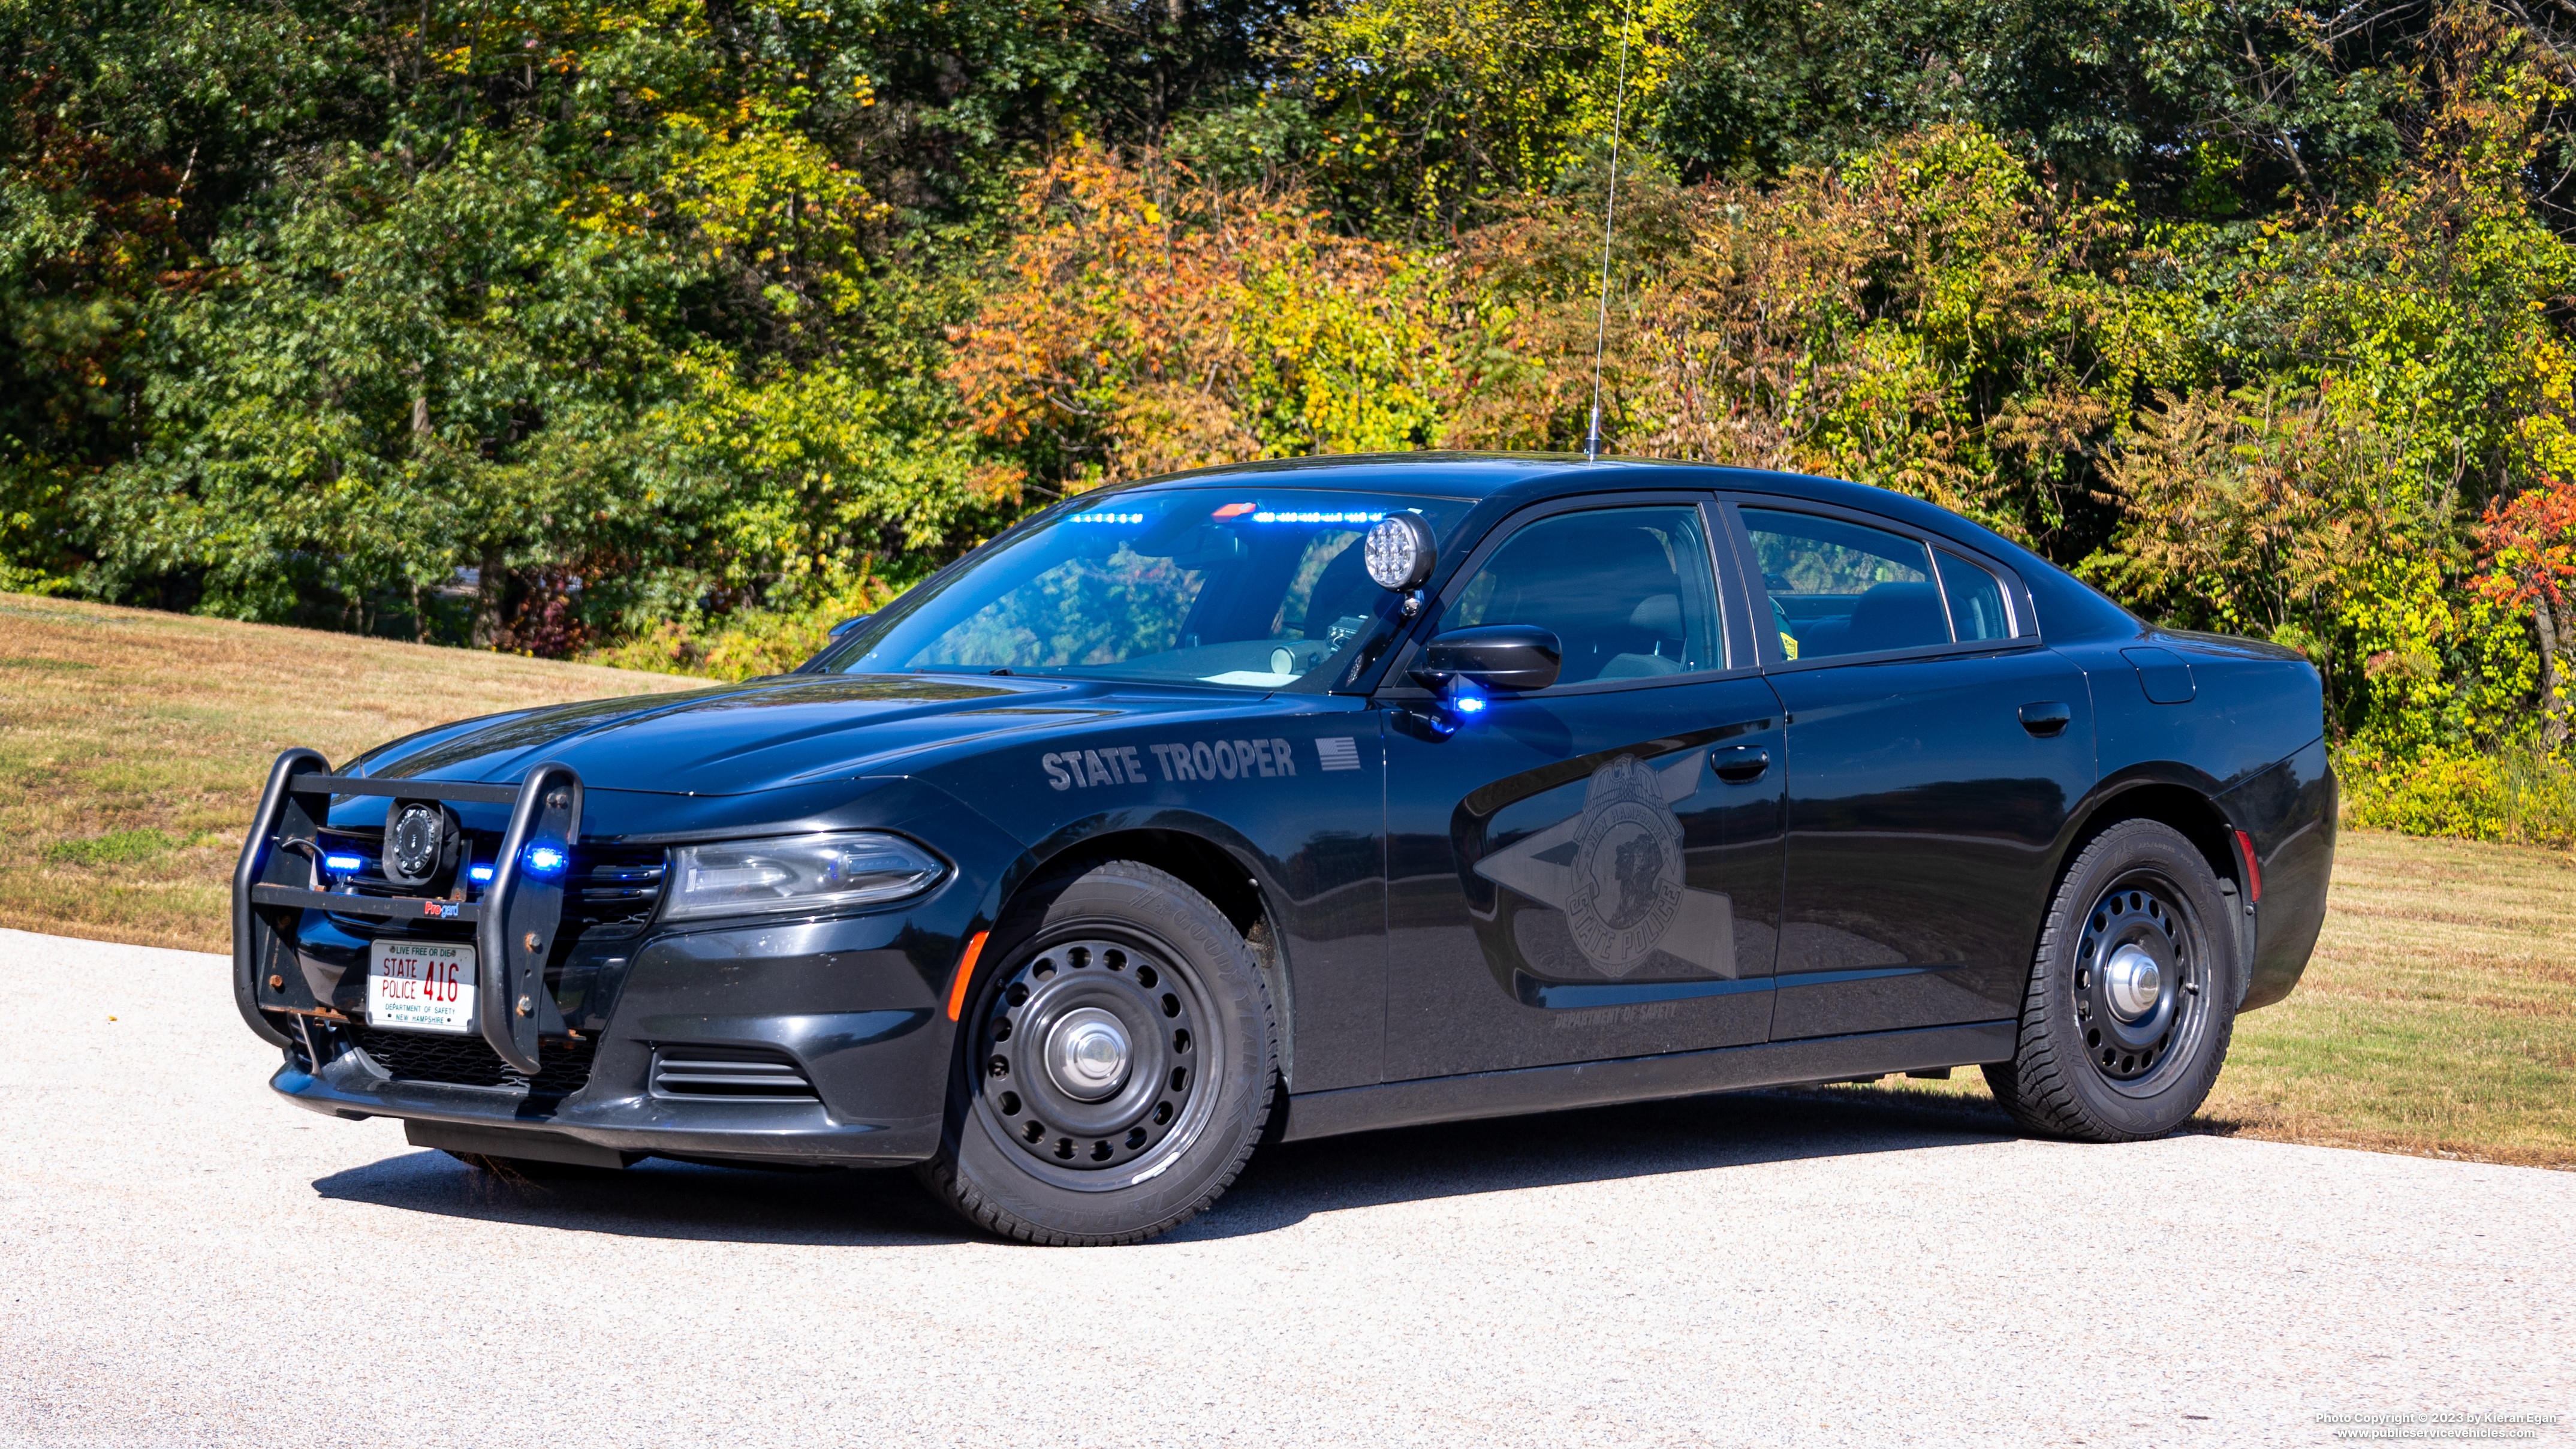 A photo  of New Hampshire State Police
            Cruiser 416, a 2015-2019 Dodge Charger             taken by Kieran Egan